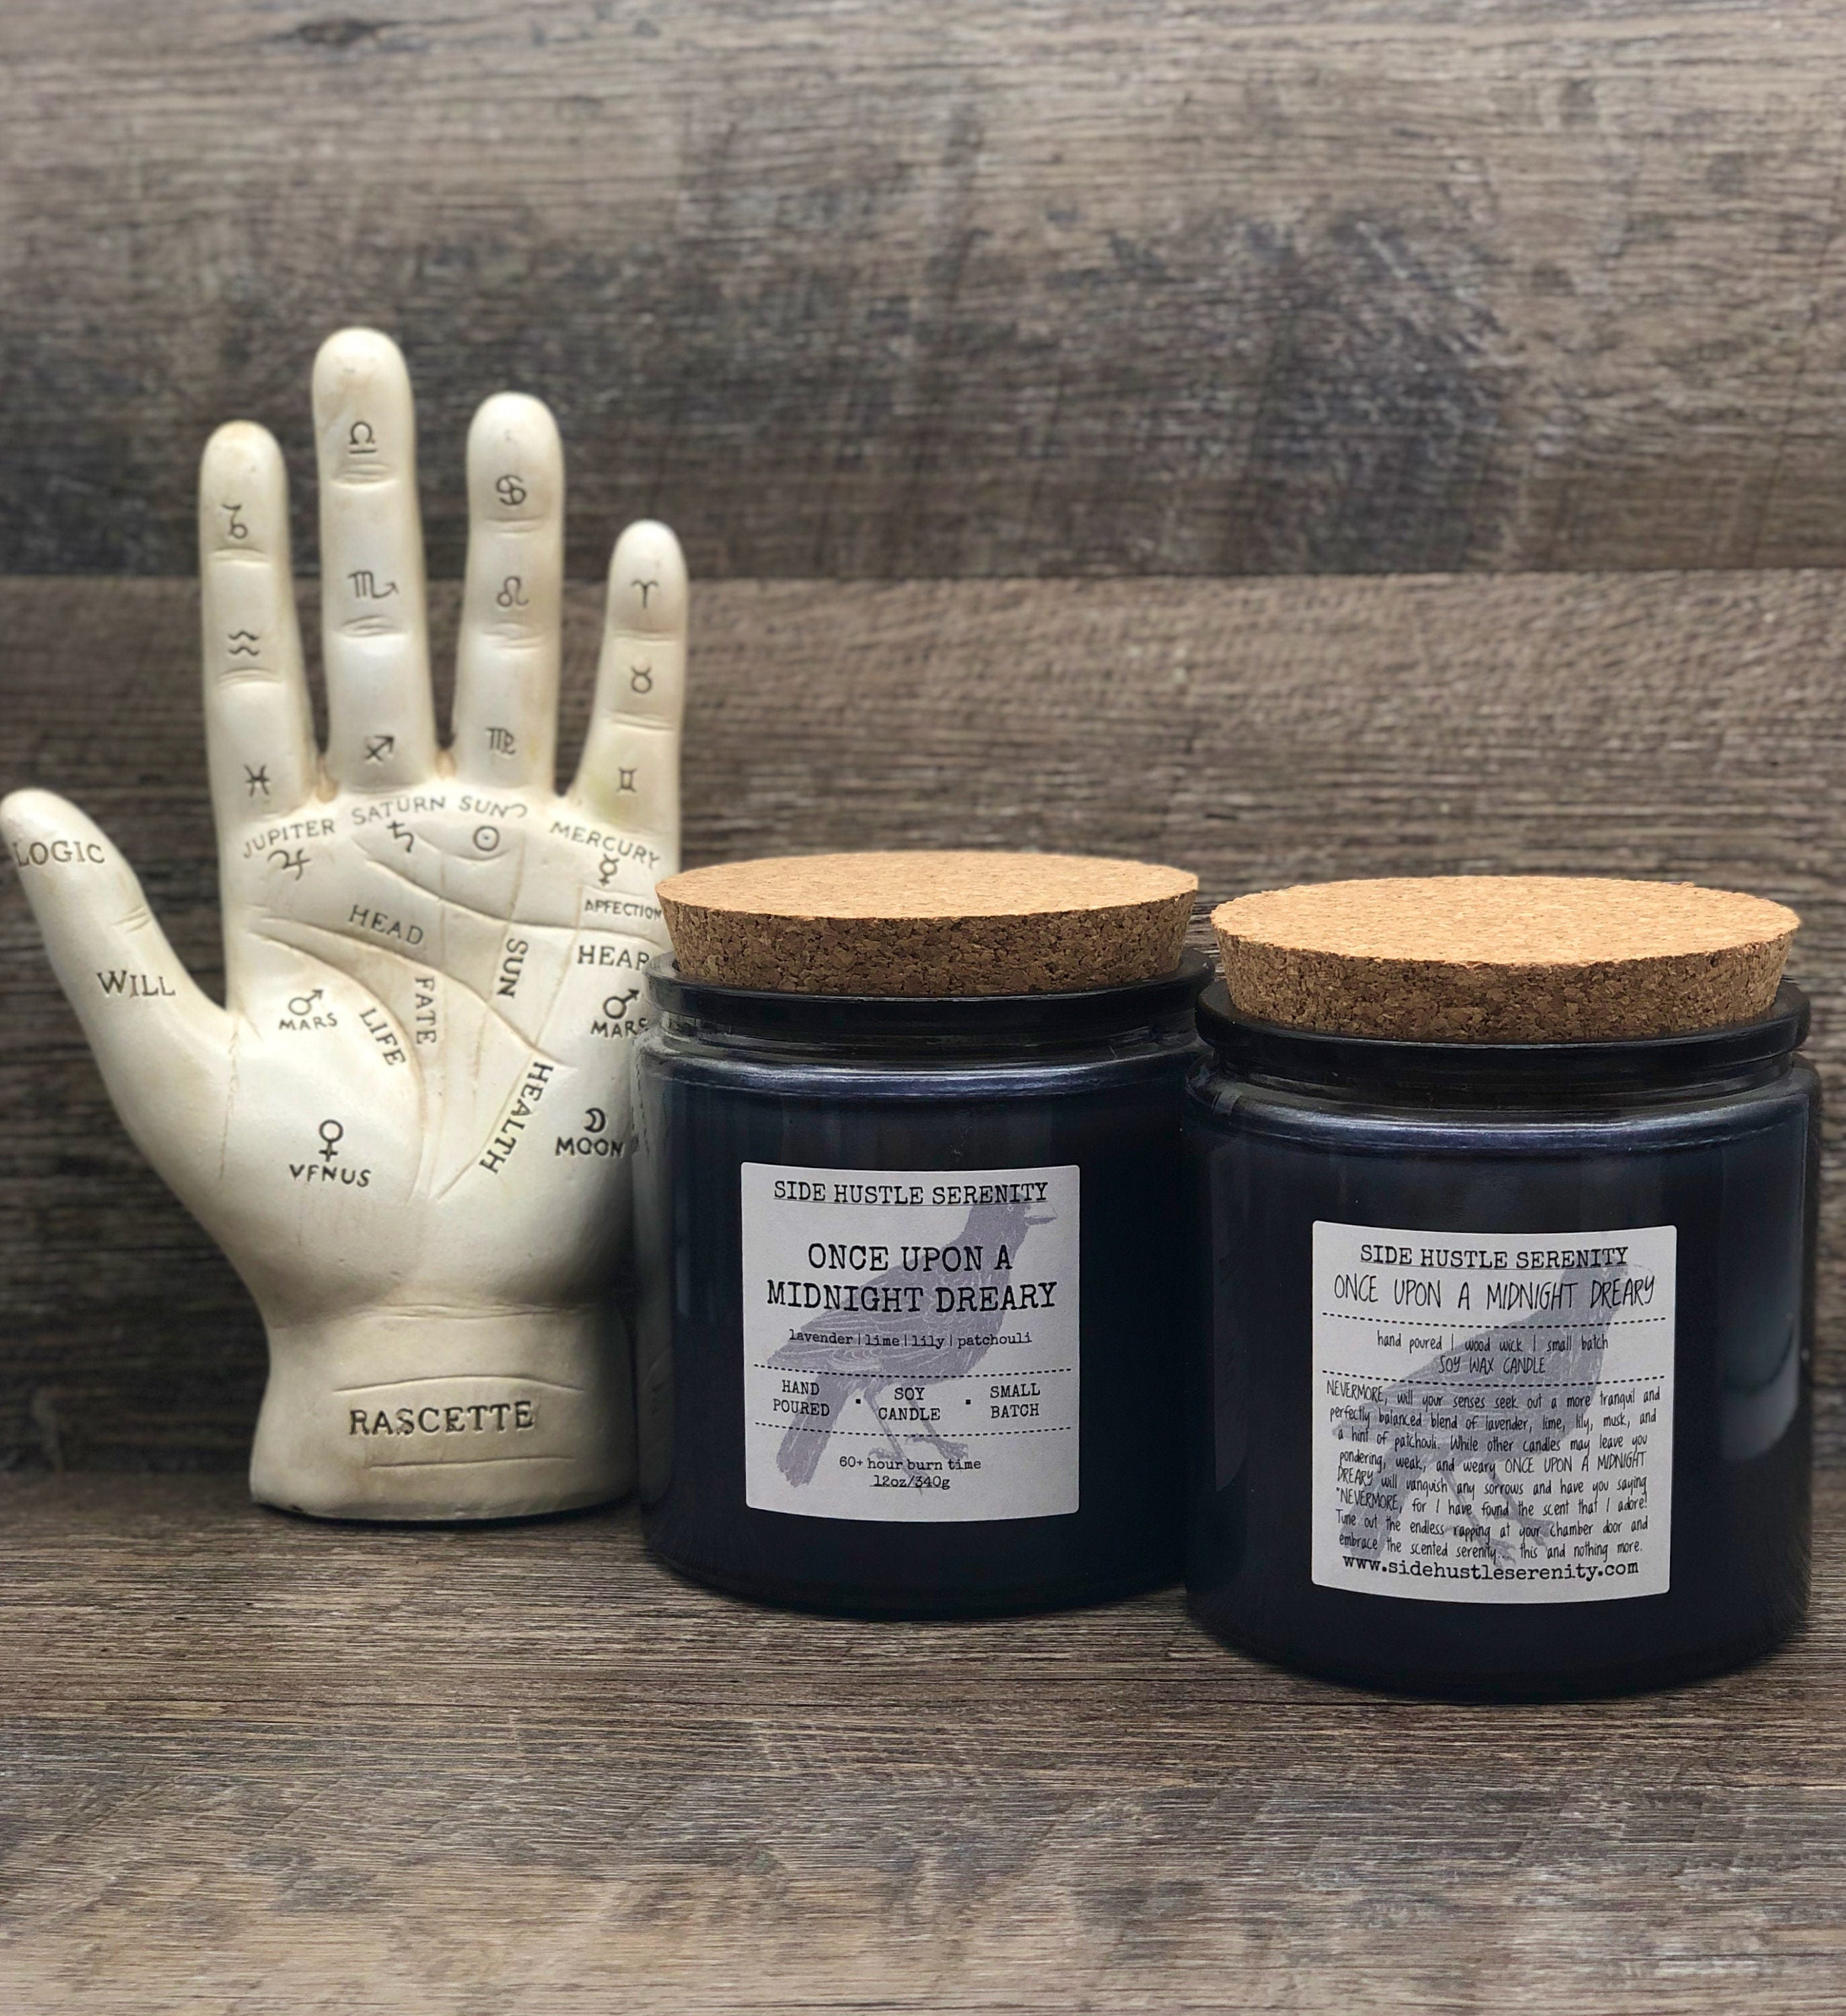 Once Upon a Midnight Dreary Scented Soy Candle | Midsummer's Night Scented | 3.5oz Wood Wick Candle | Halloween Candle | Poe | Poetry Candle